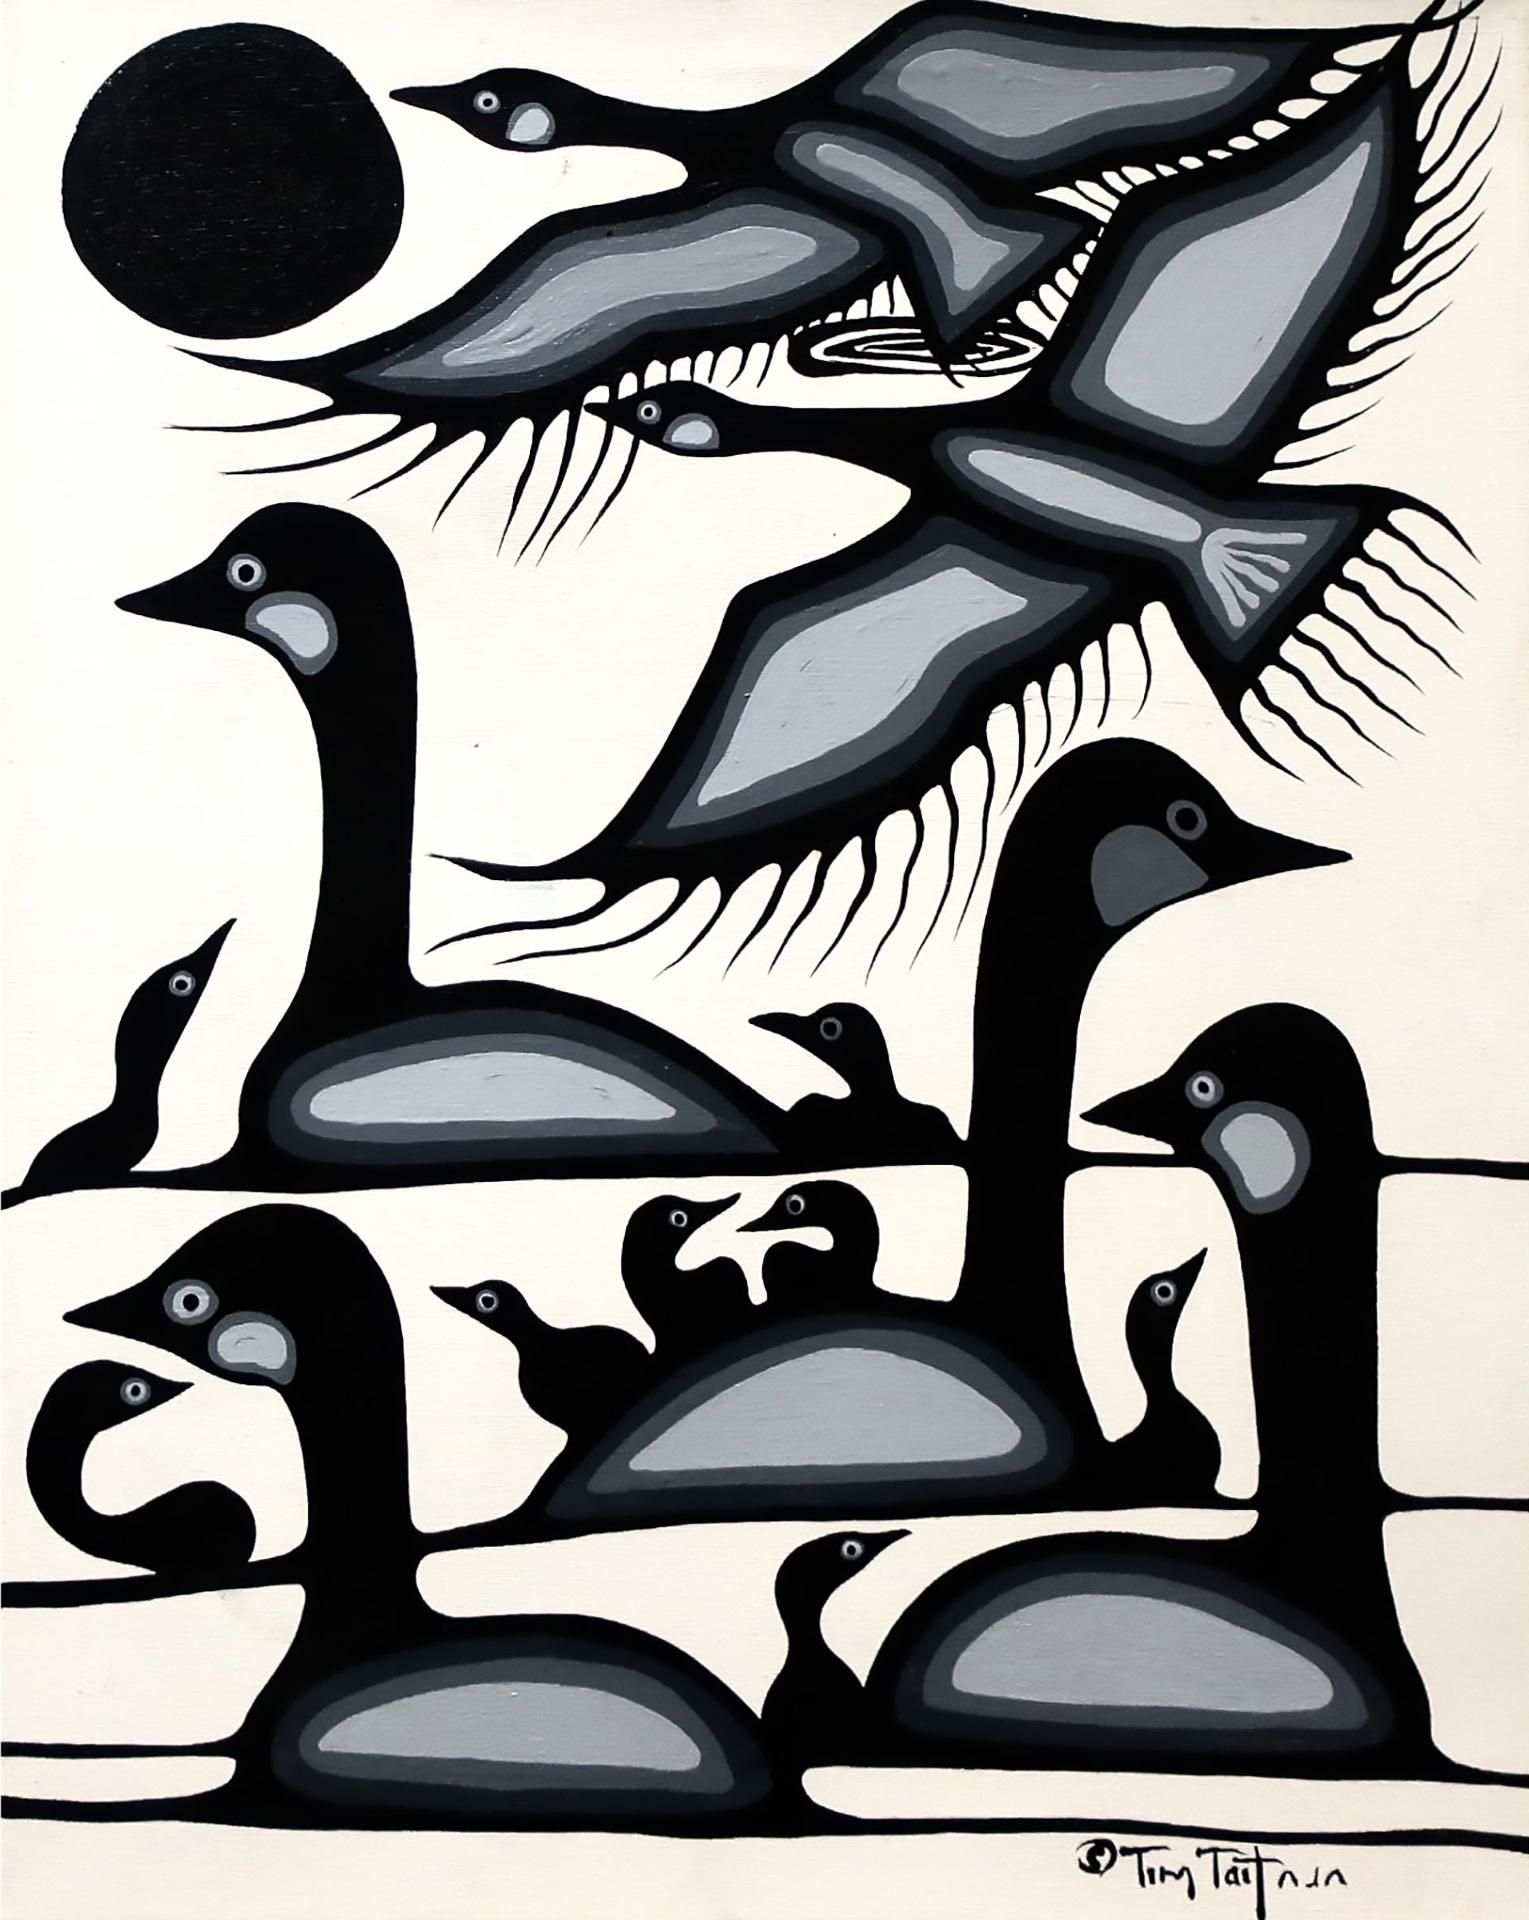 Tim Tait (1970) - Geese At Their Northern Spot - Almost Time To Go South